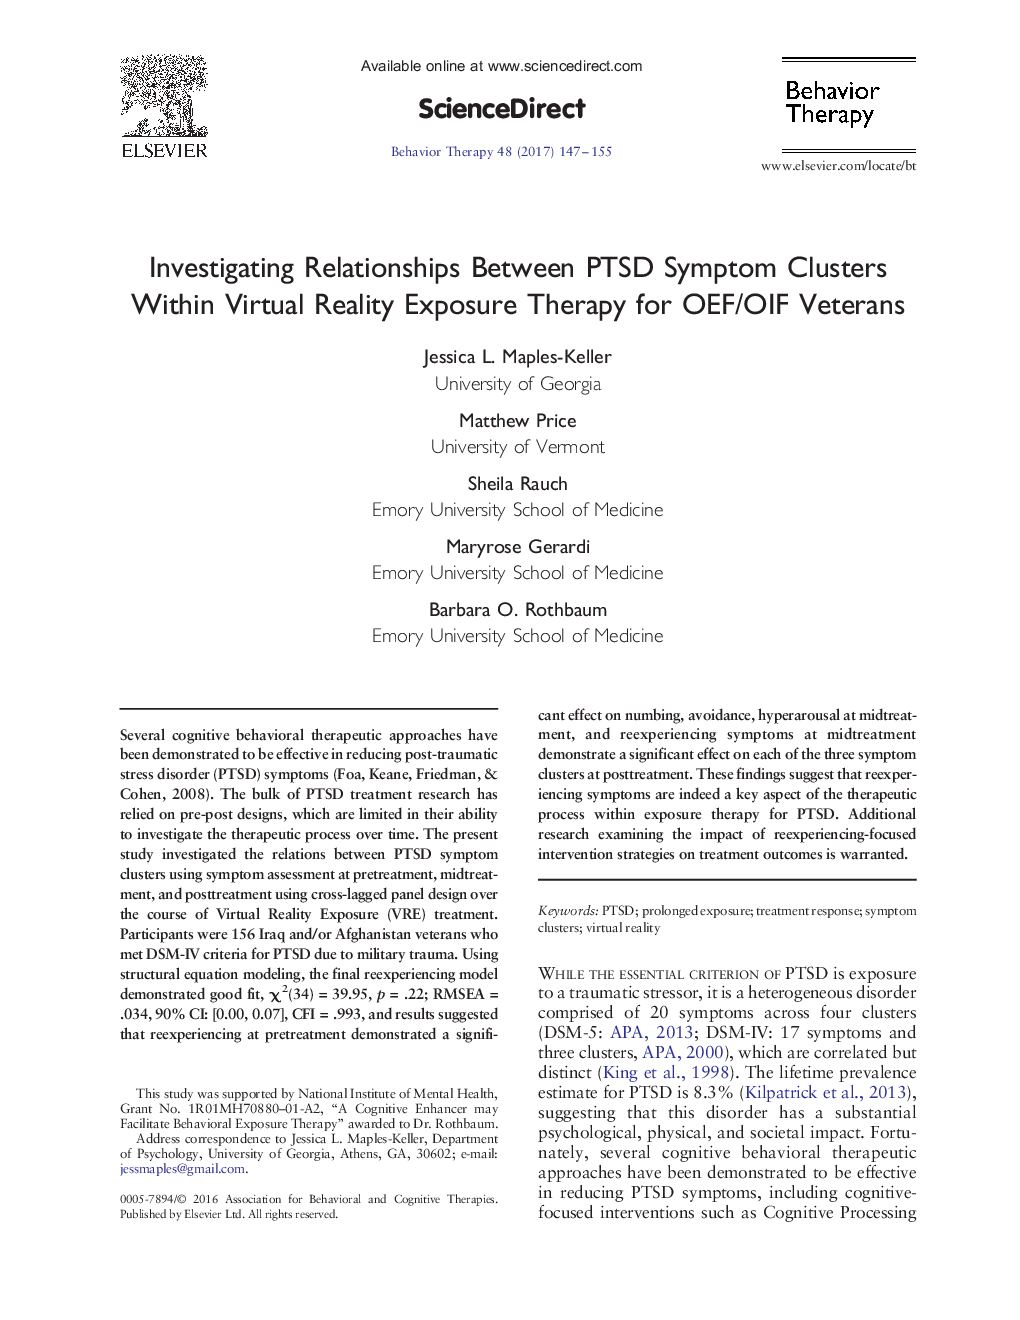 Investigating Relationships Between PTSD Symptom Clusters Within Virtual Reality Exposure Therapy for OEF/OIF Veterans